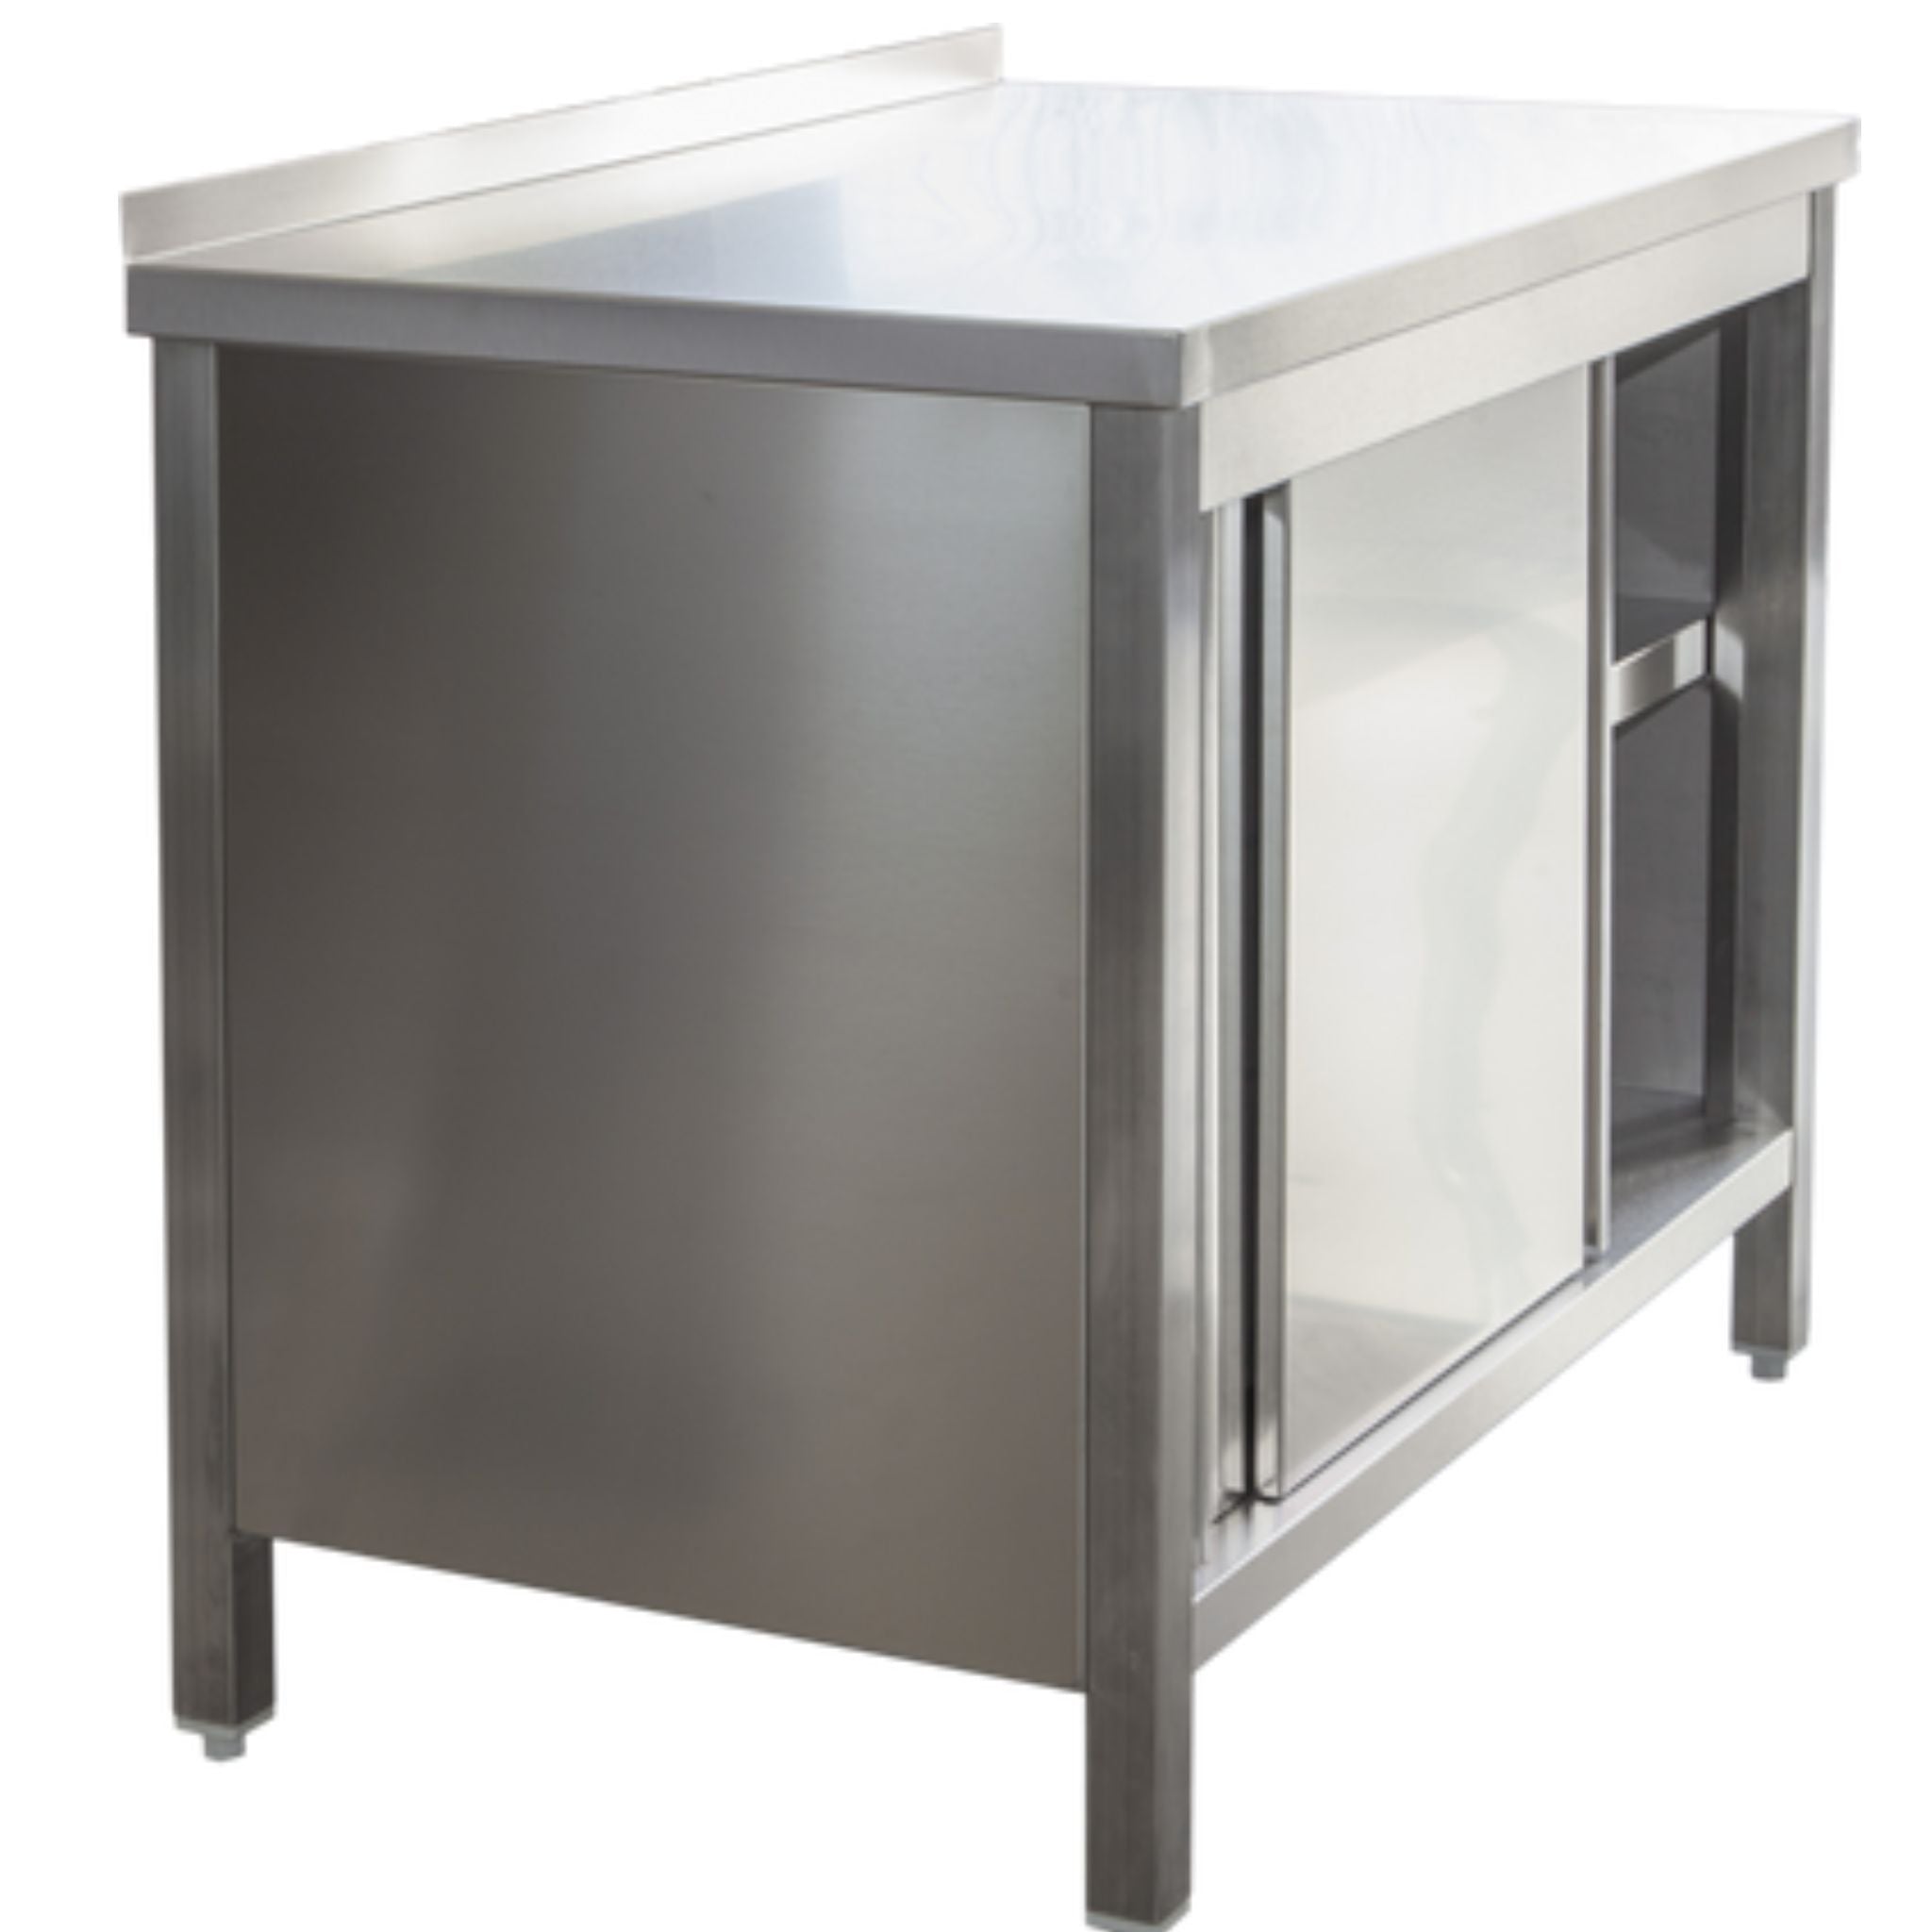 Professional stainless steel work cabinet with sliding doors - 0